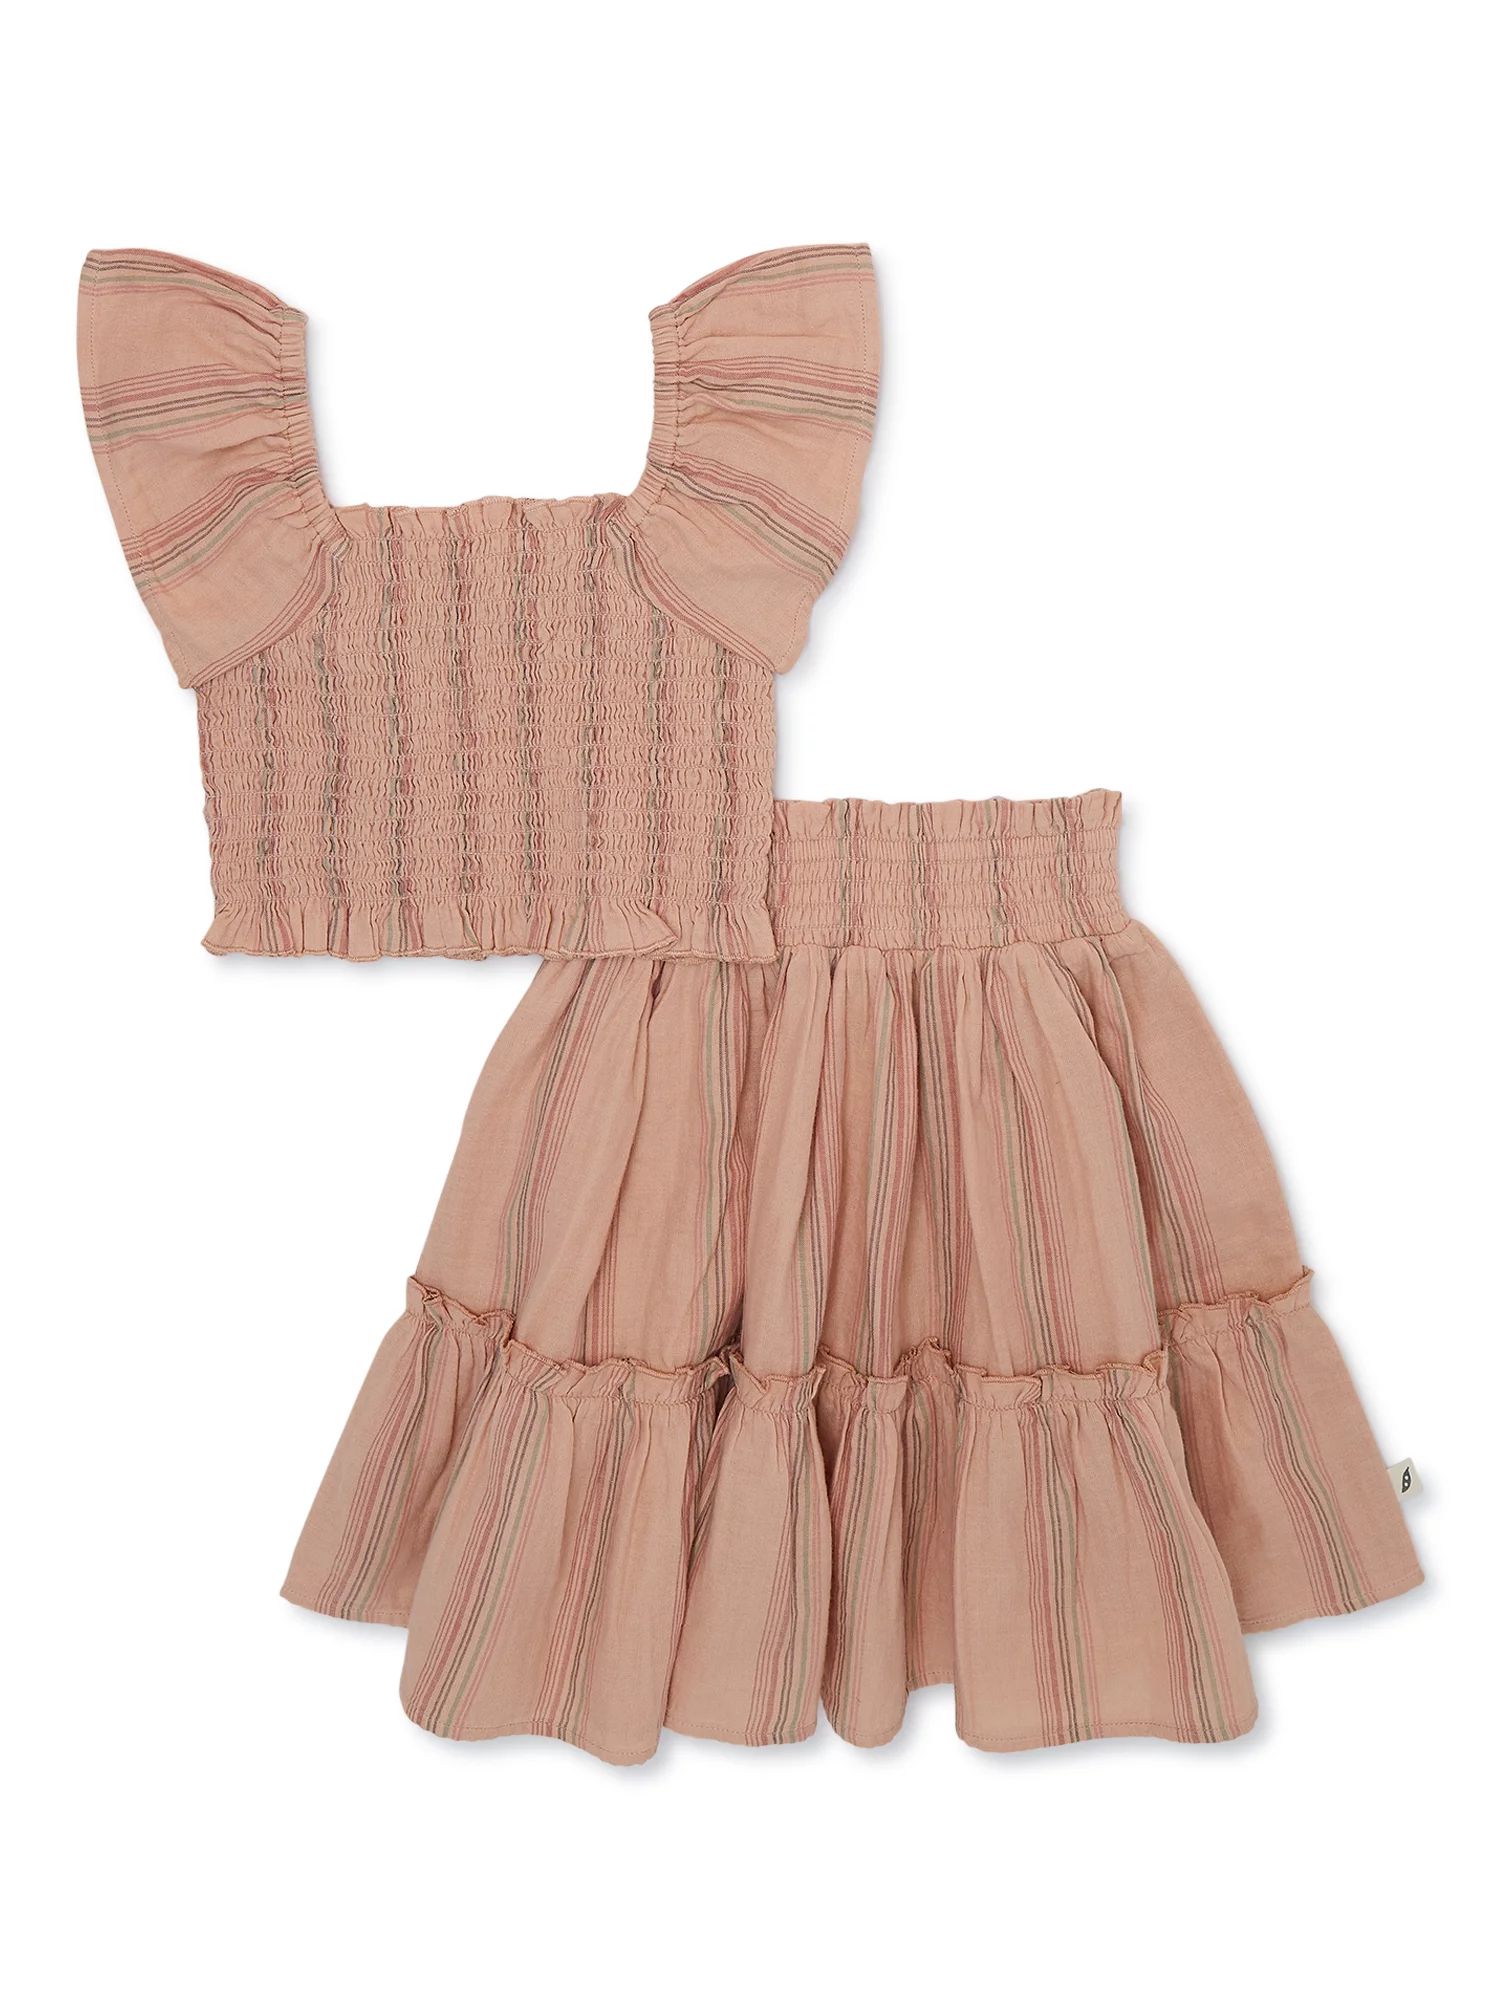 easy-peasy Baby and Toddler Girl Smocked Top and Skirt Set, 2-Piece, Sizes 12 Months-5T | Walmart (US)